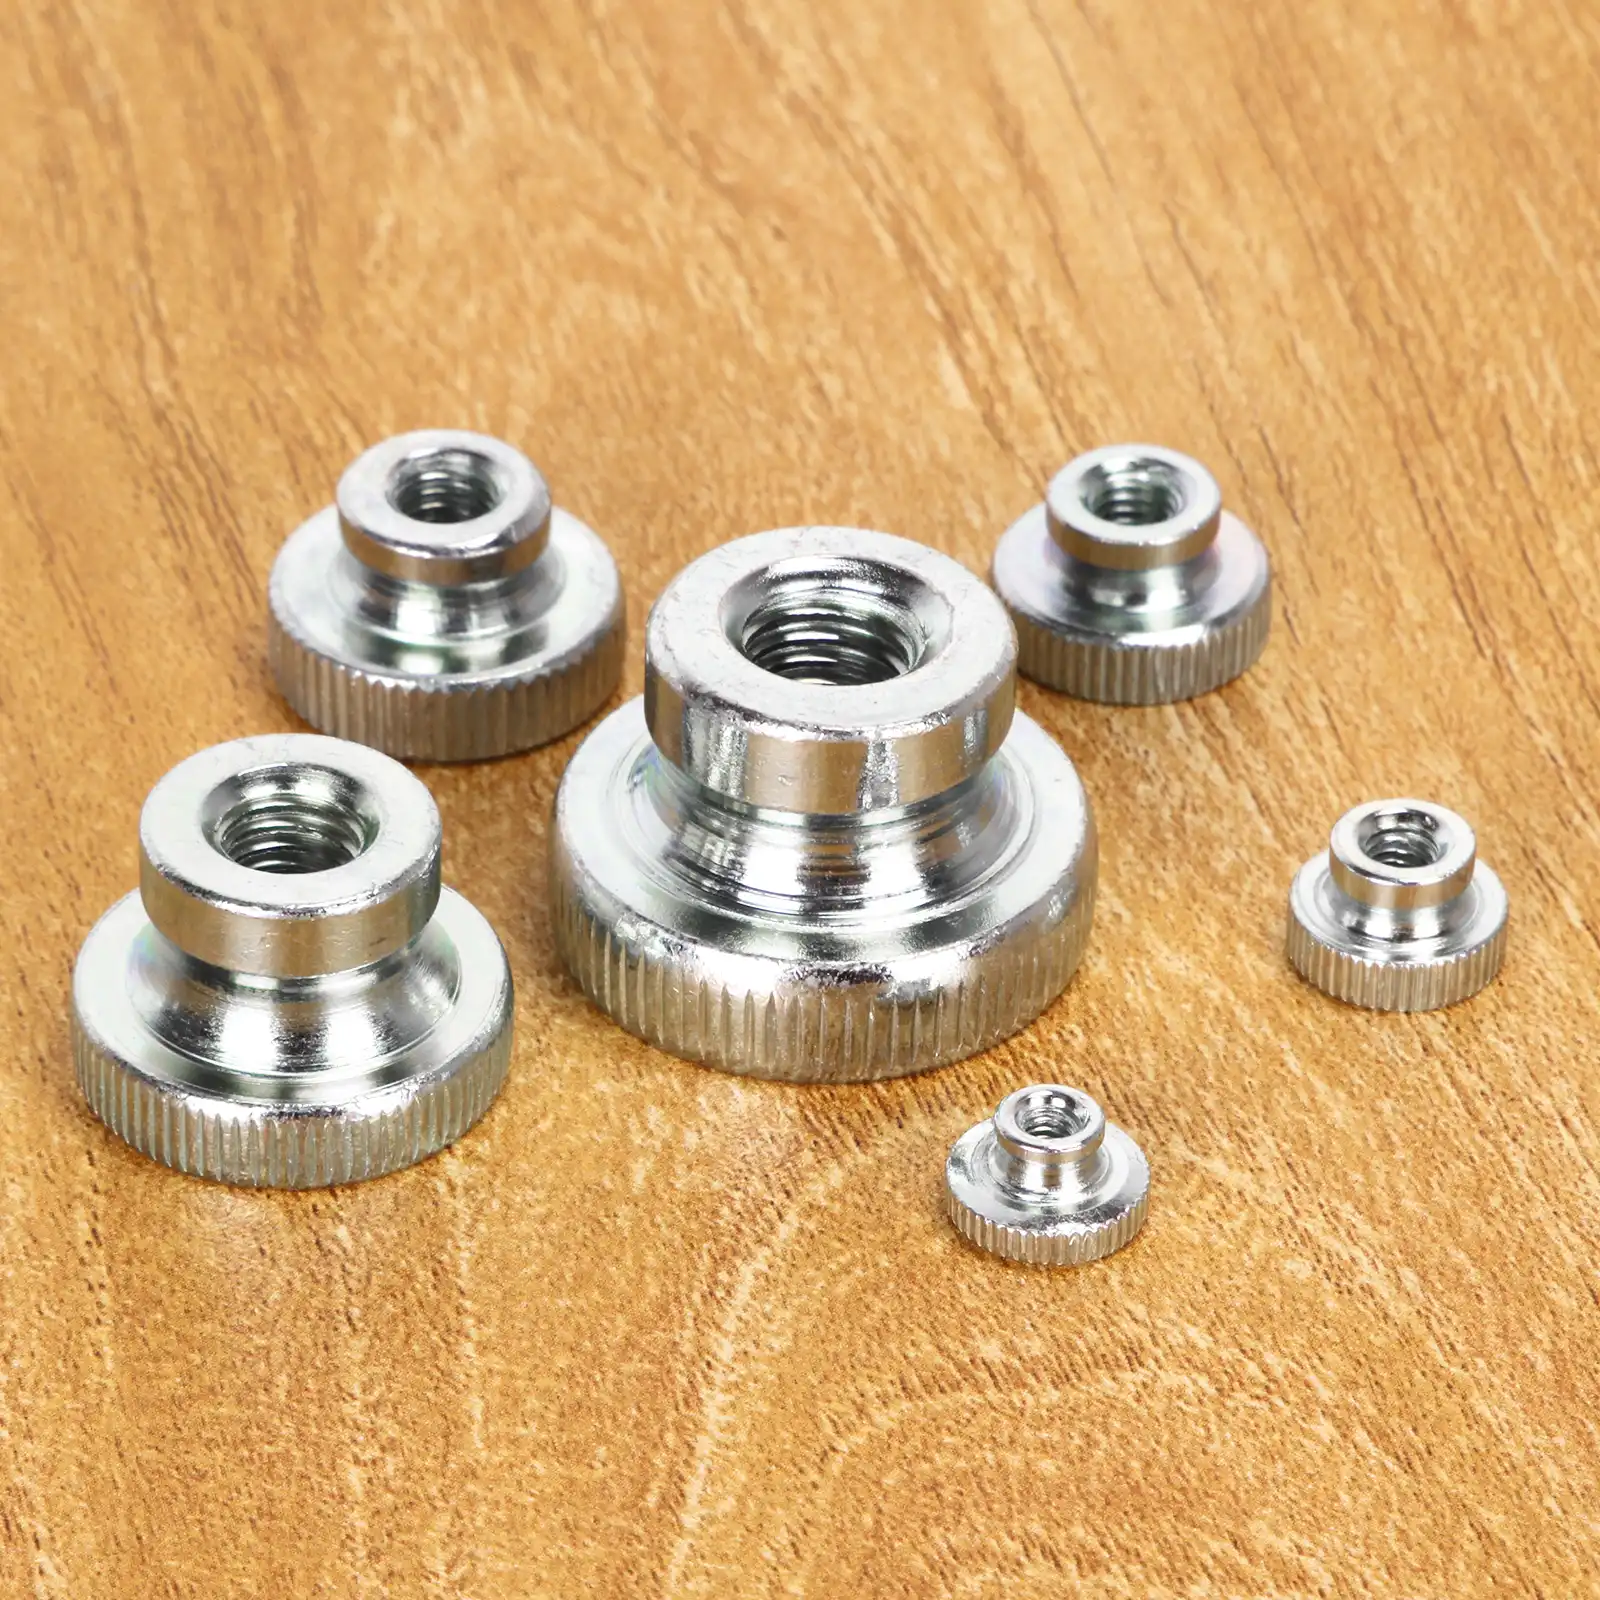 10x M2 M2.5 M3 M4 Carbon Steel Plated Nickle Plating Solid Knurled Thumb Nuts